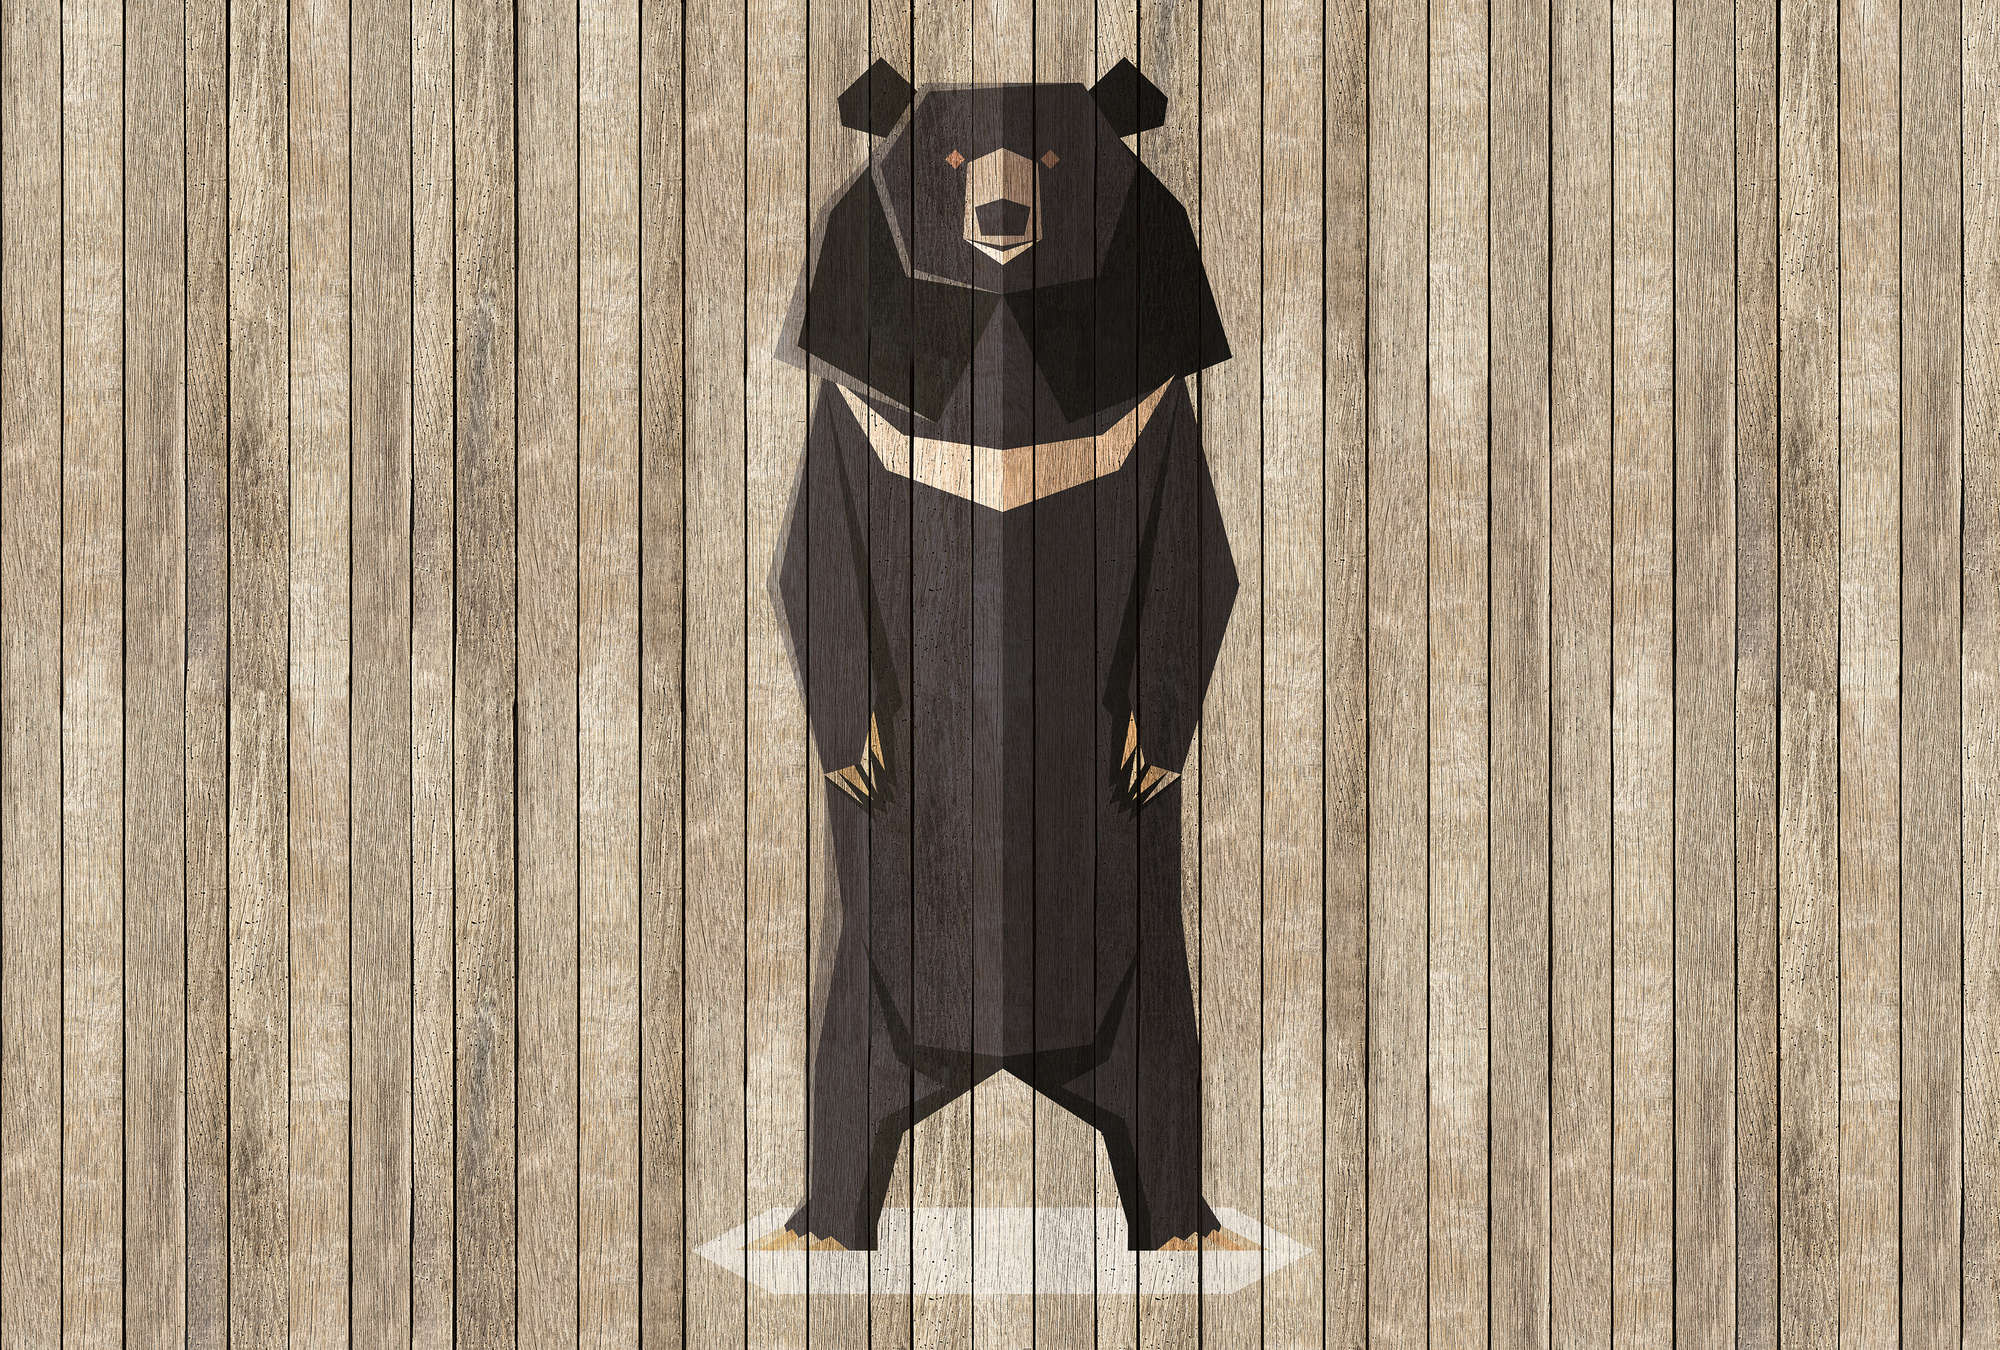             Born to Be Wild 1 - Board Wall Wallpaper with Bears - Wooden Panels Wide - Beige, Brown | Premium Smooth Non-woven
        